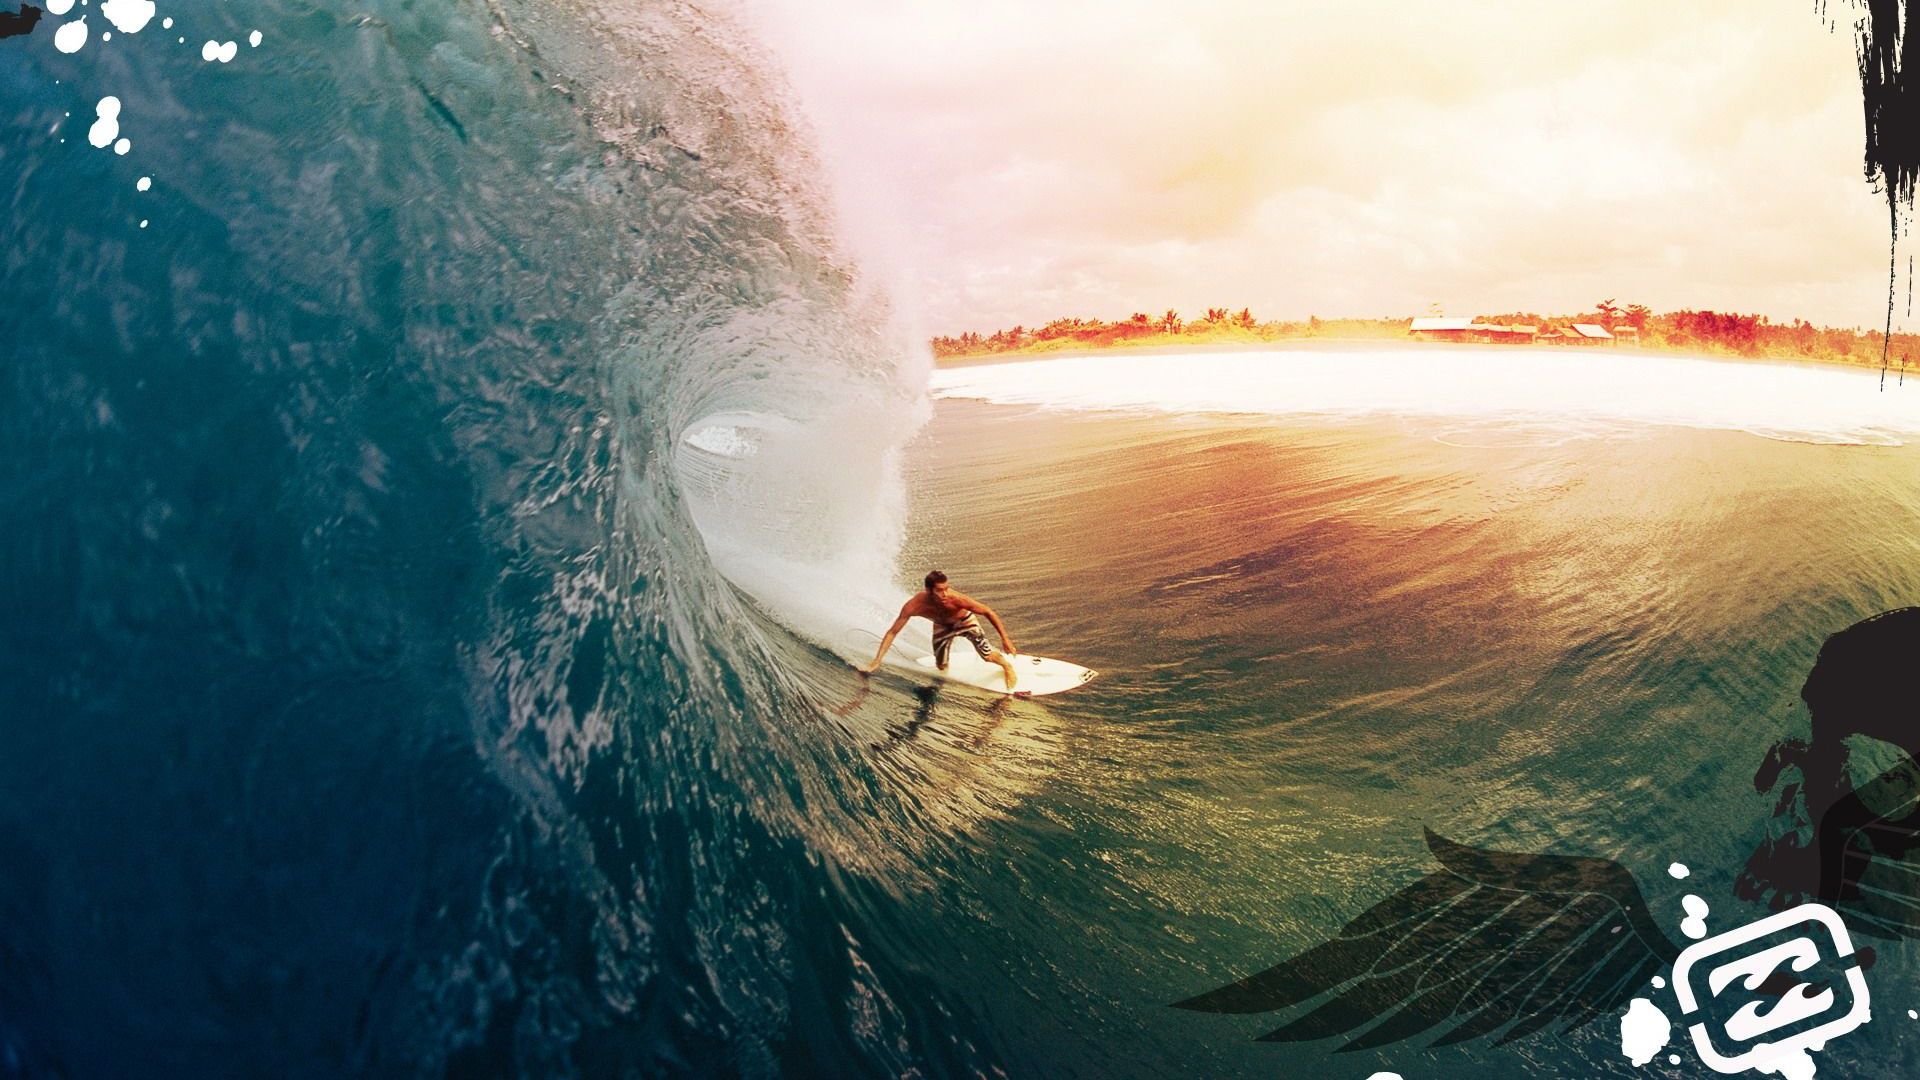 Surfing wallpapers hd